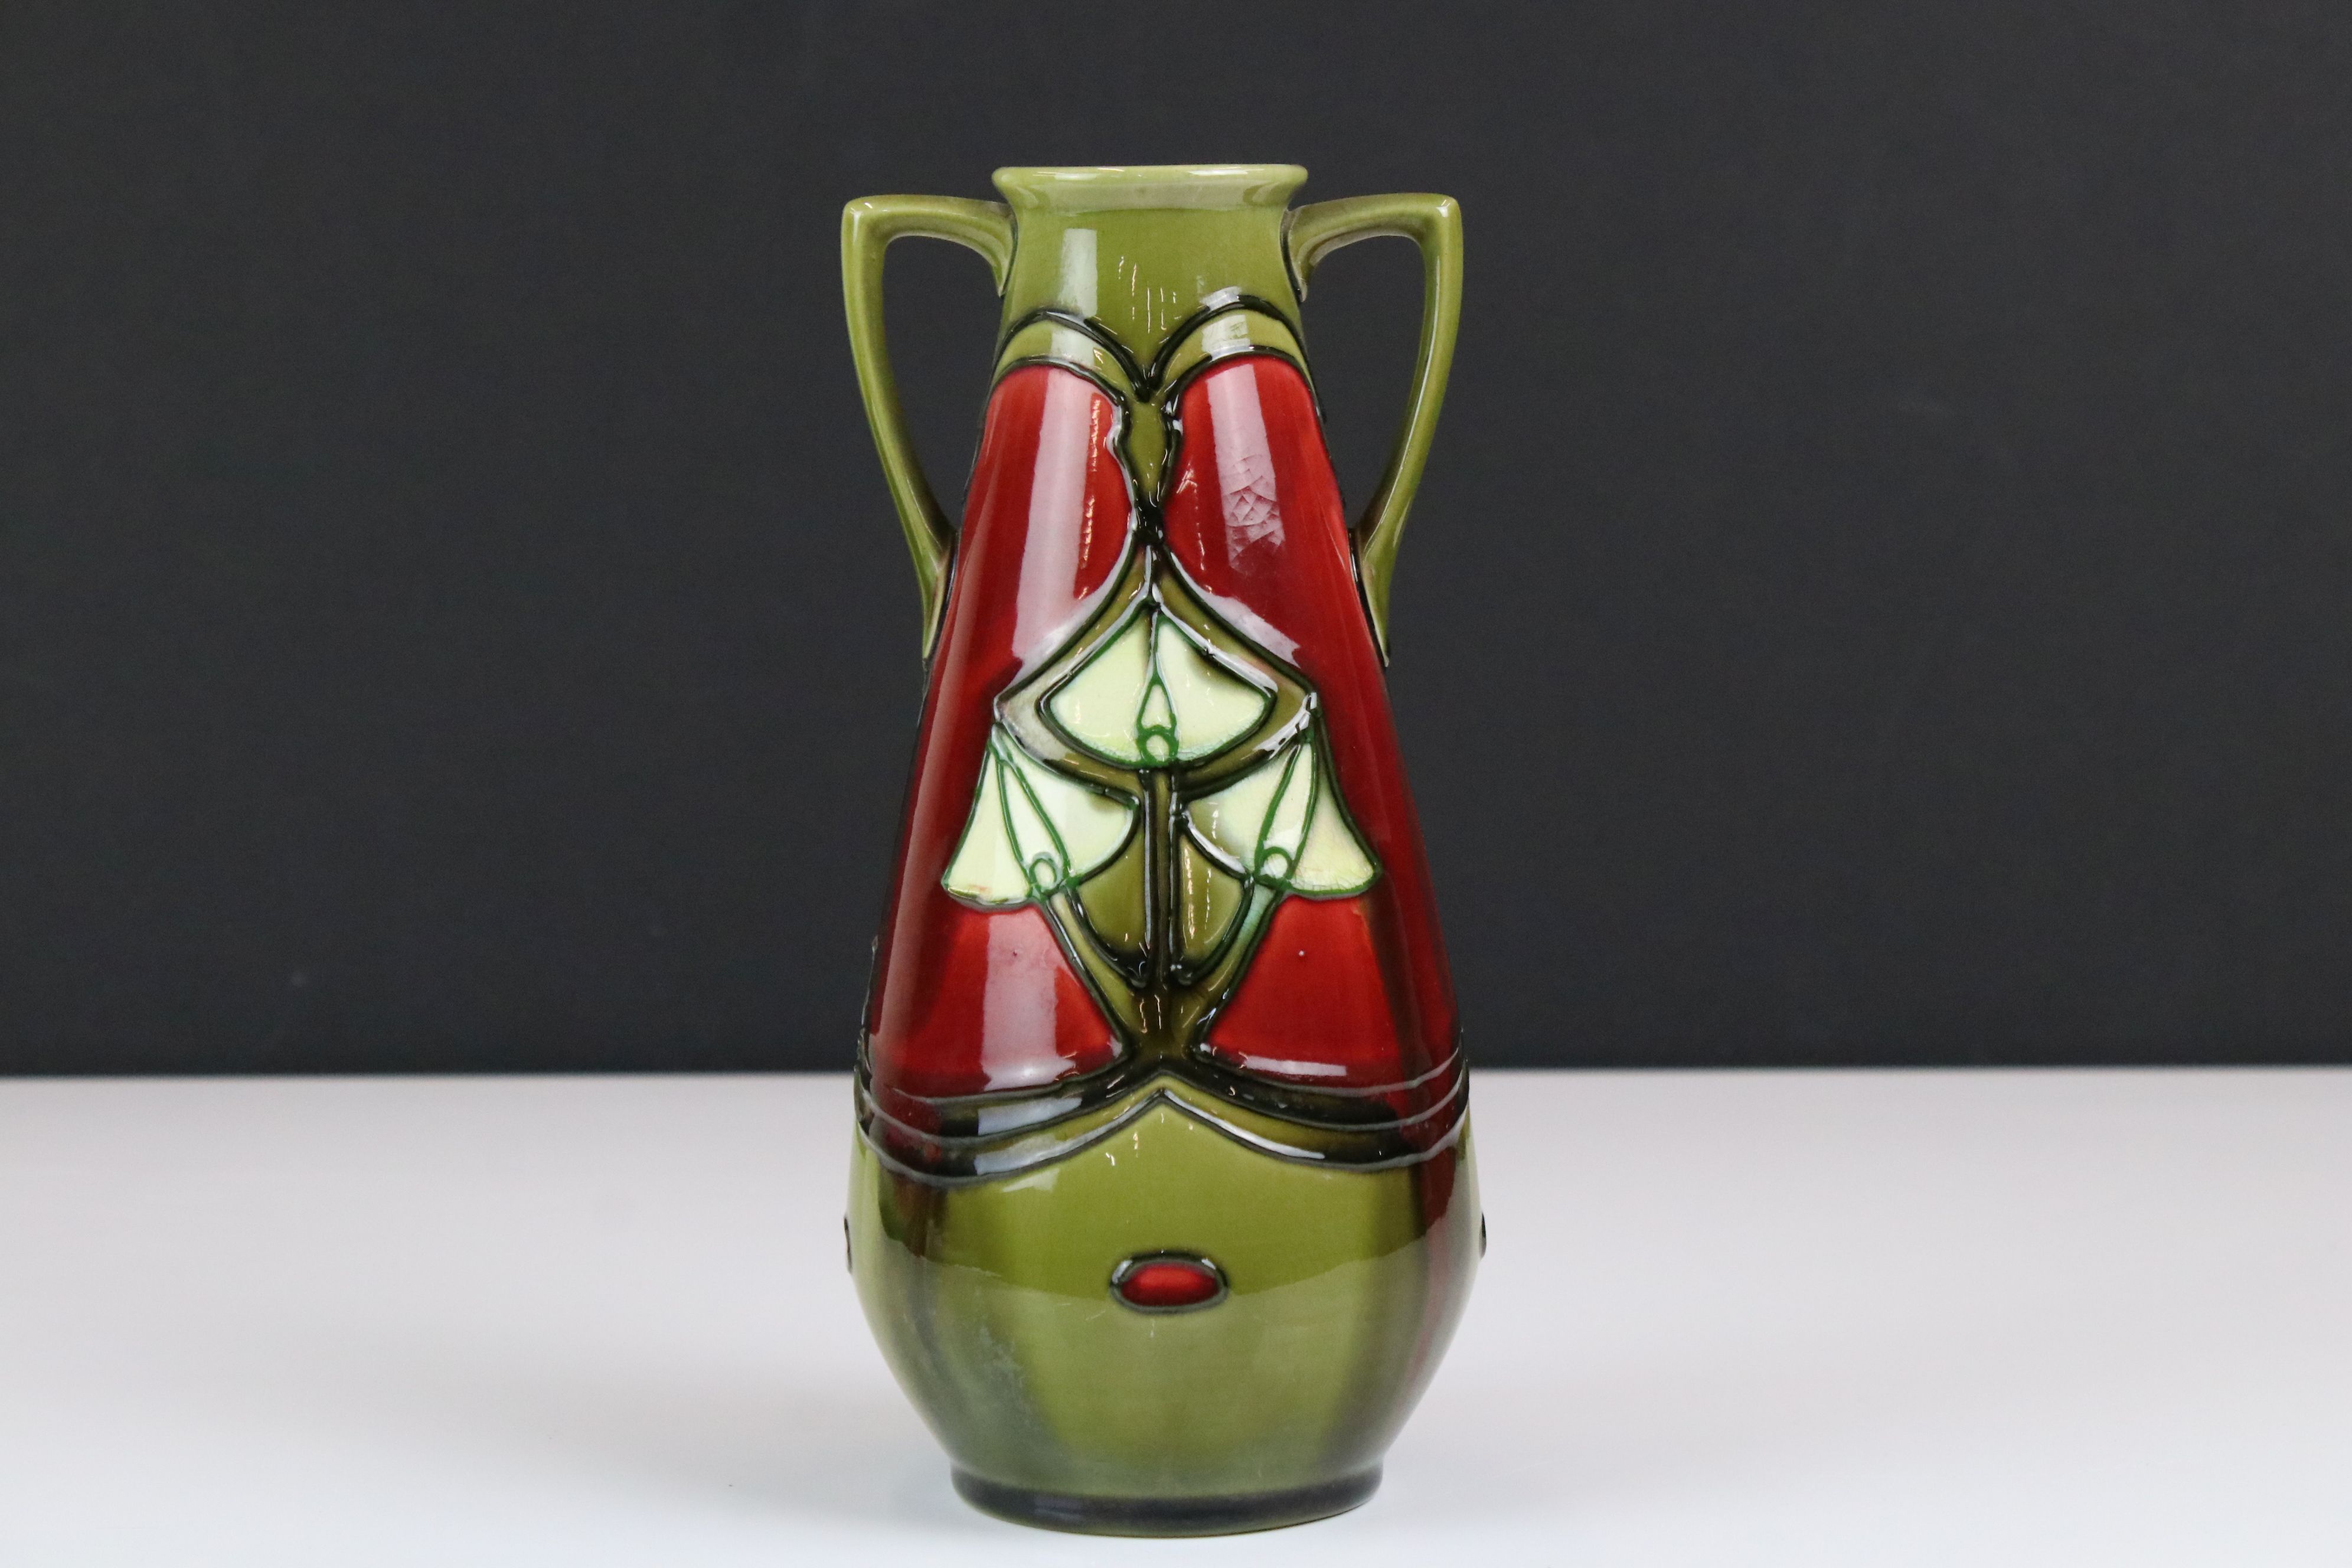 Minton Secessionist Red and Green Glazed Twin Handled Vase, marked No. 12 to base, 21cm high